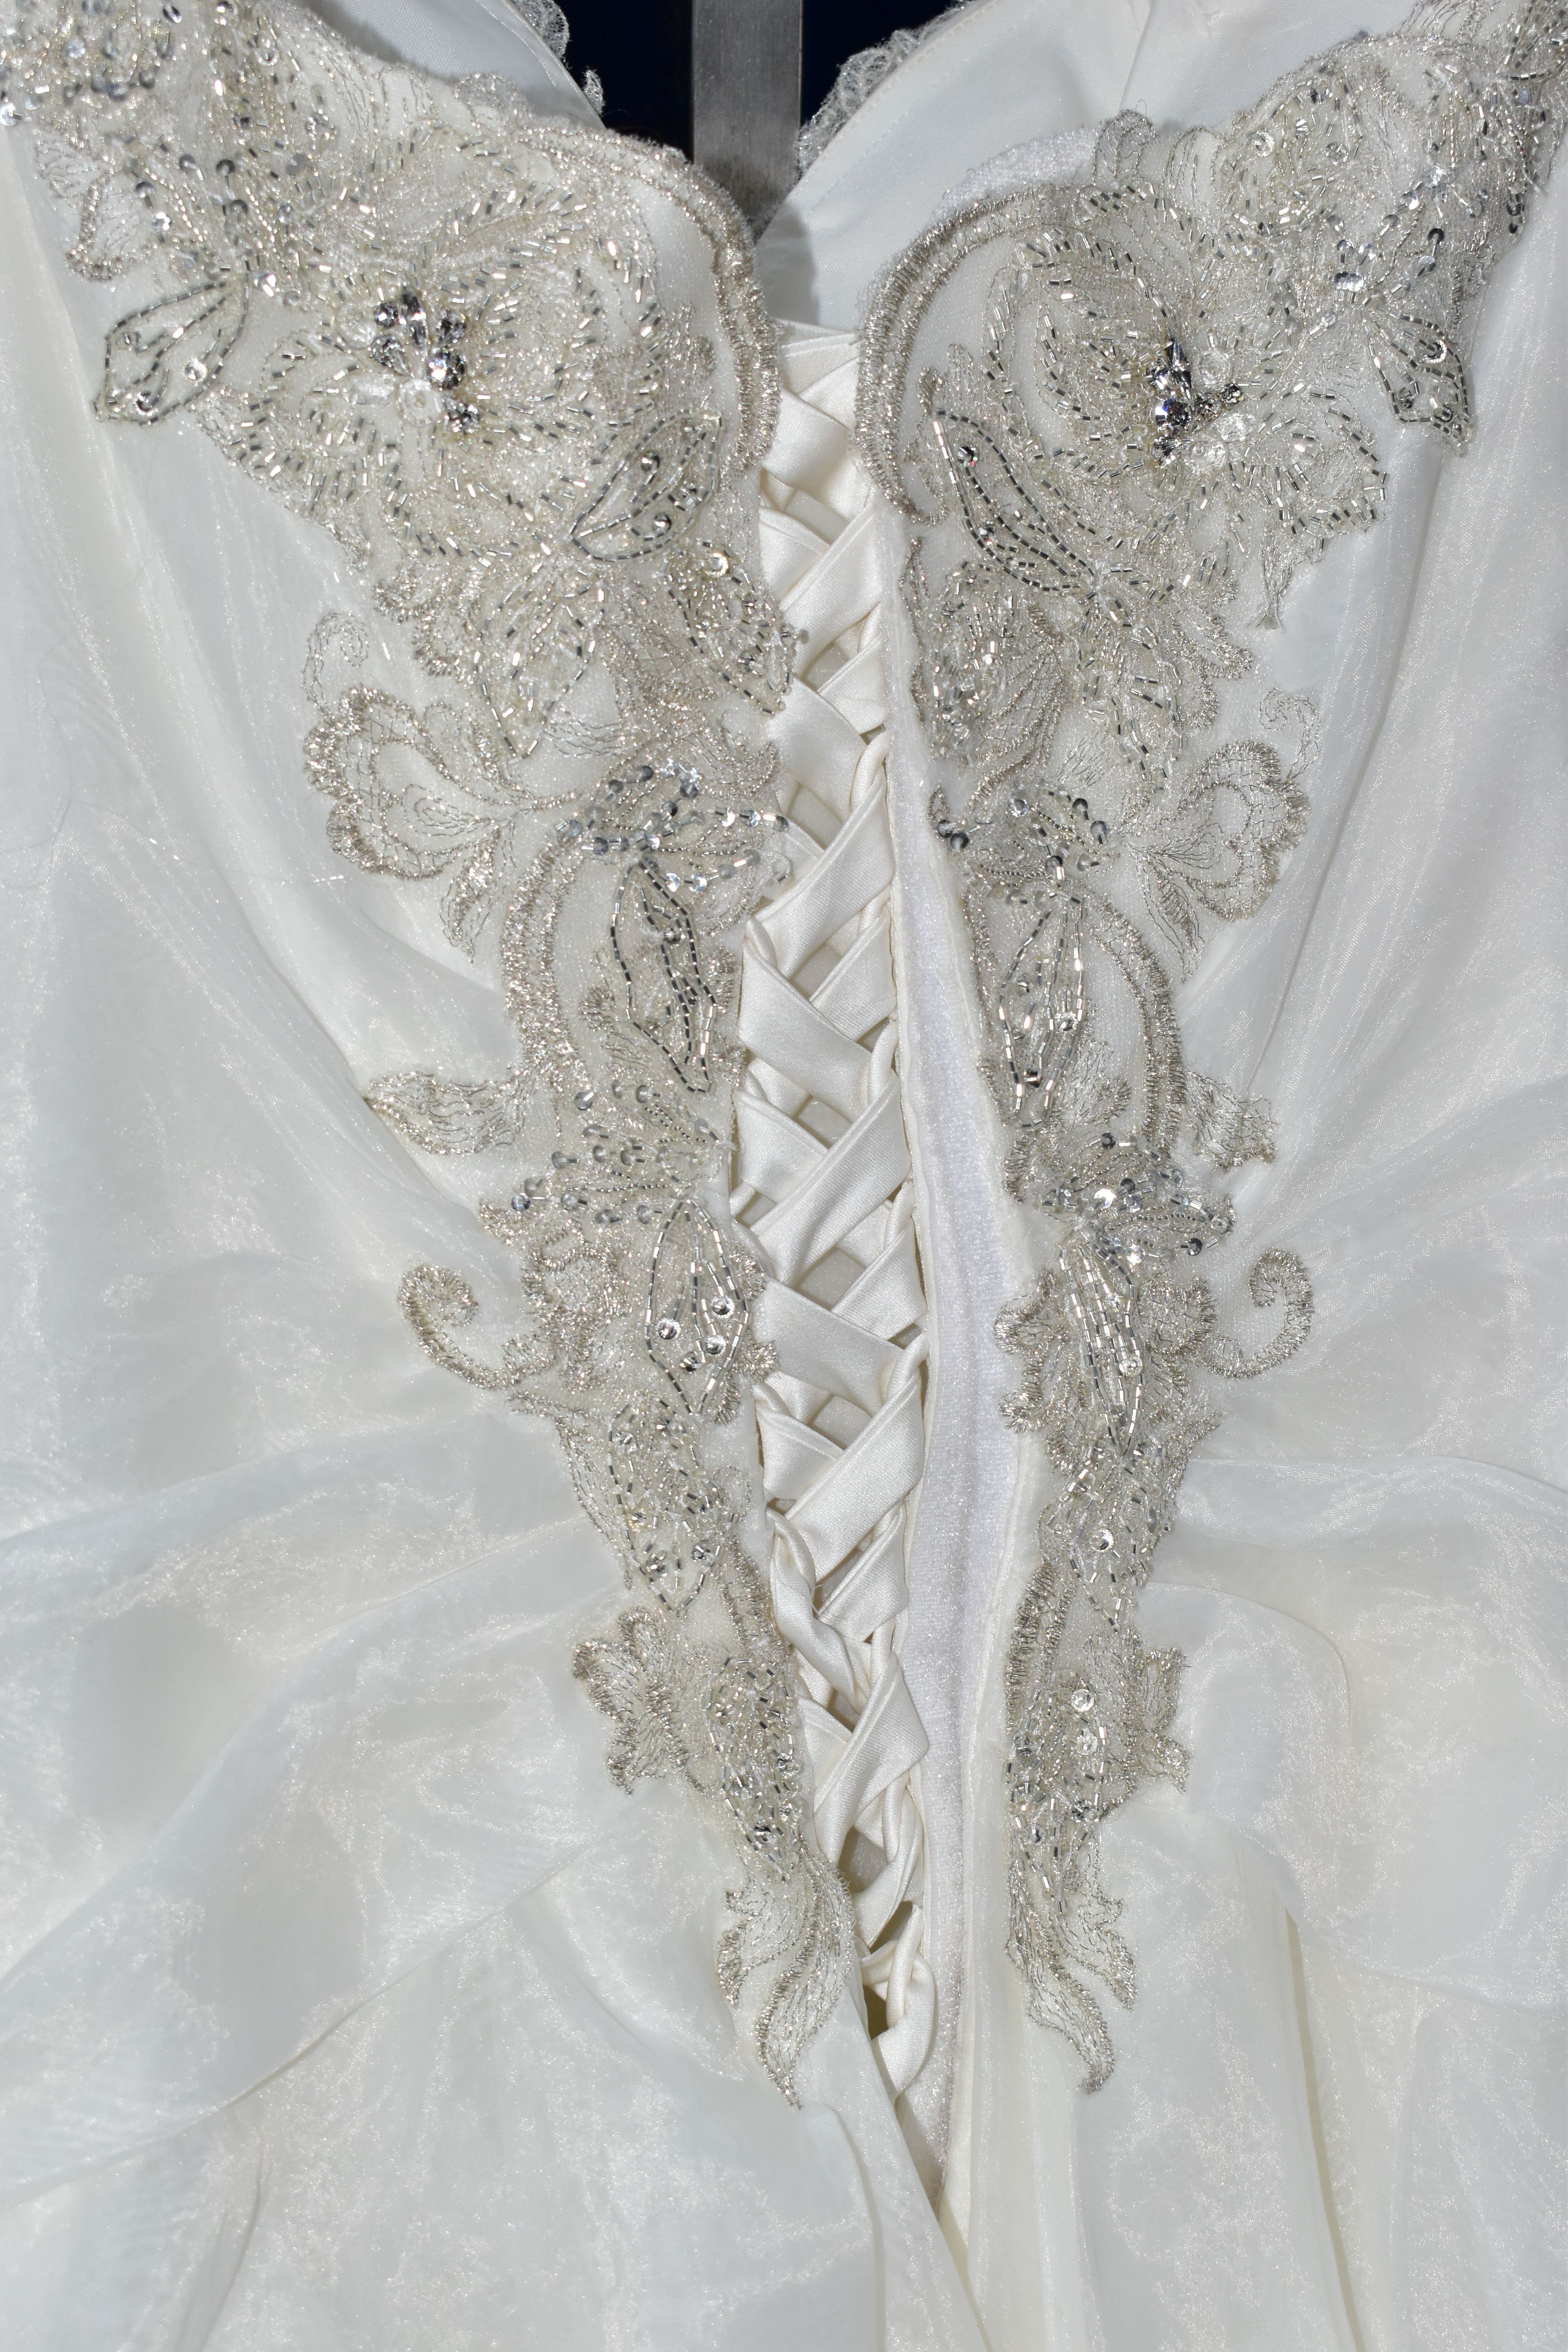 WEDDING DRESS, size 6, long train, pewter accent beaded appliques, strapping detail in the back, - Image 10 of 10